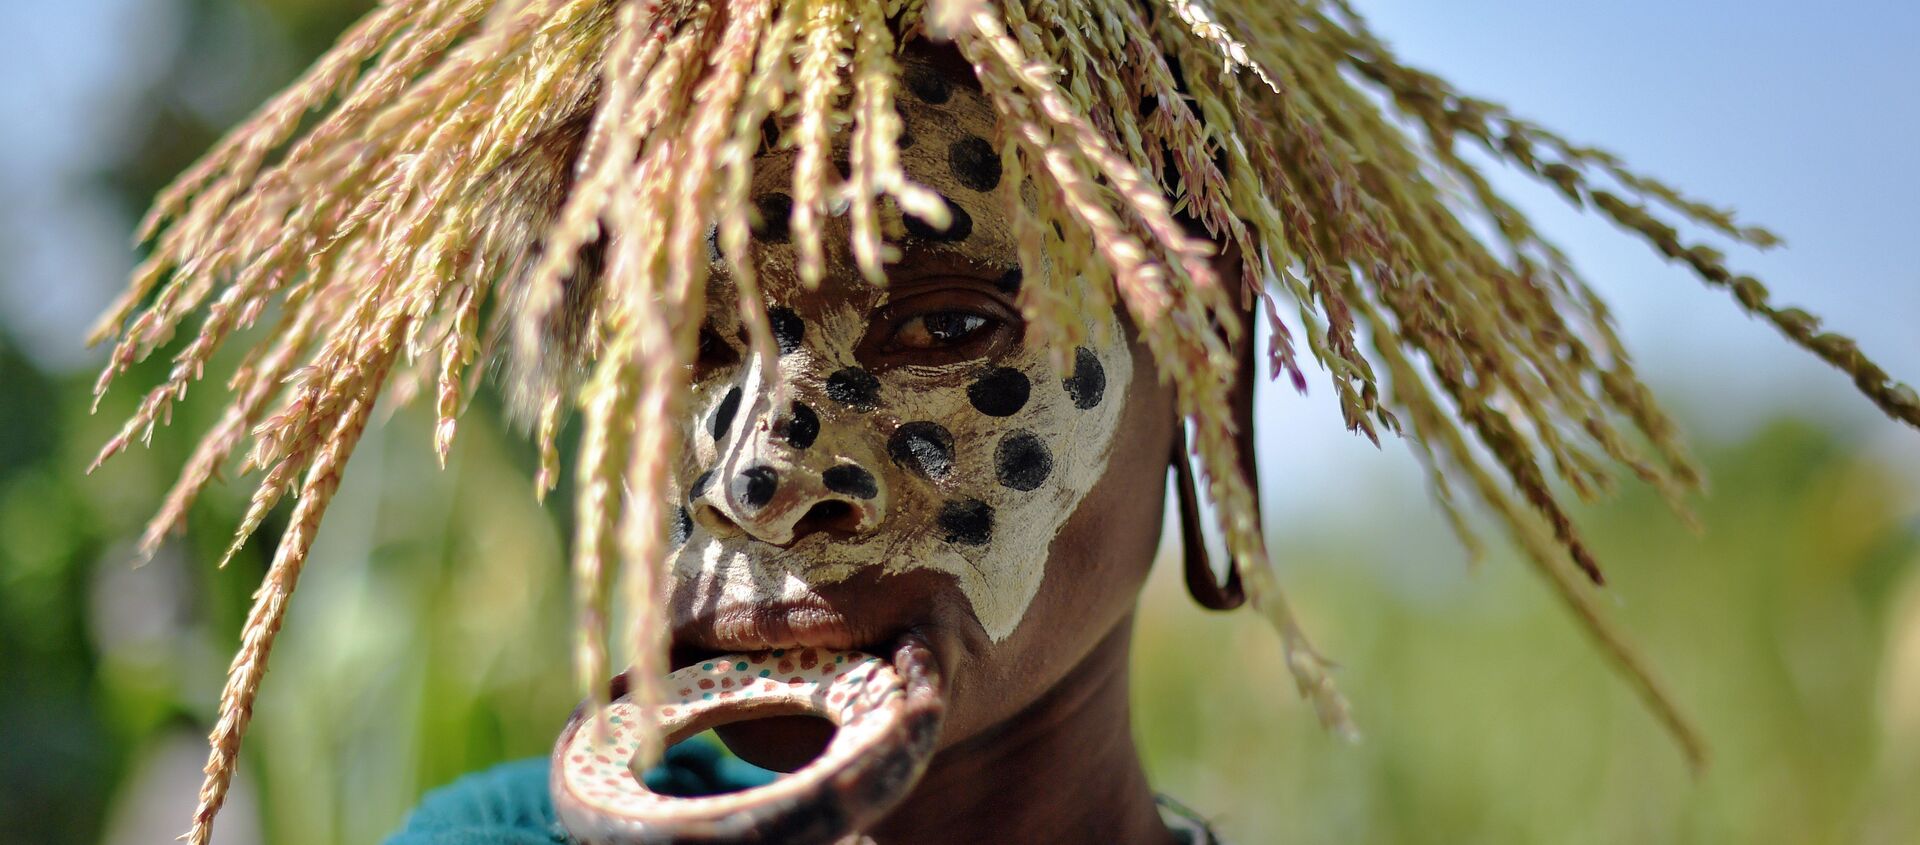 A woman from the Suri tribe with a lip plate poses in Ethiopia's southern Omo Valley region near Kibbish on September 25, 2016 - Sputnik Mundo, 1920, 02.06.2017